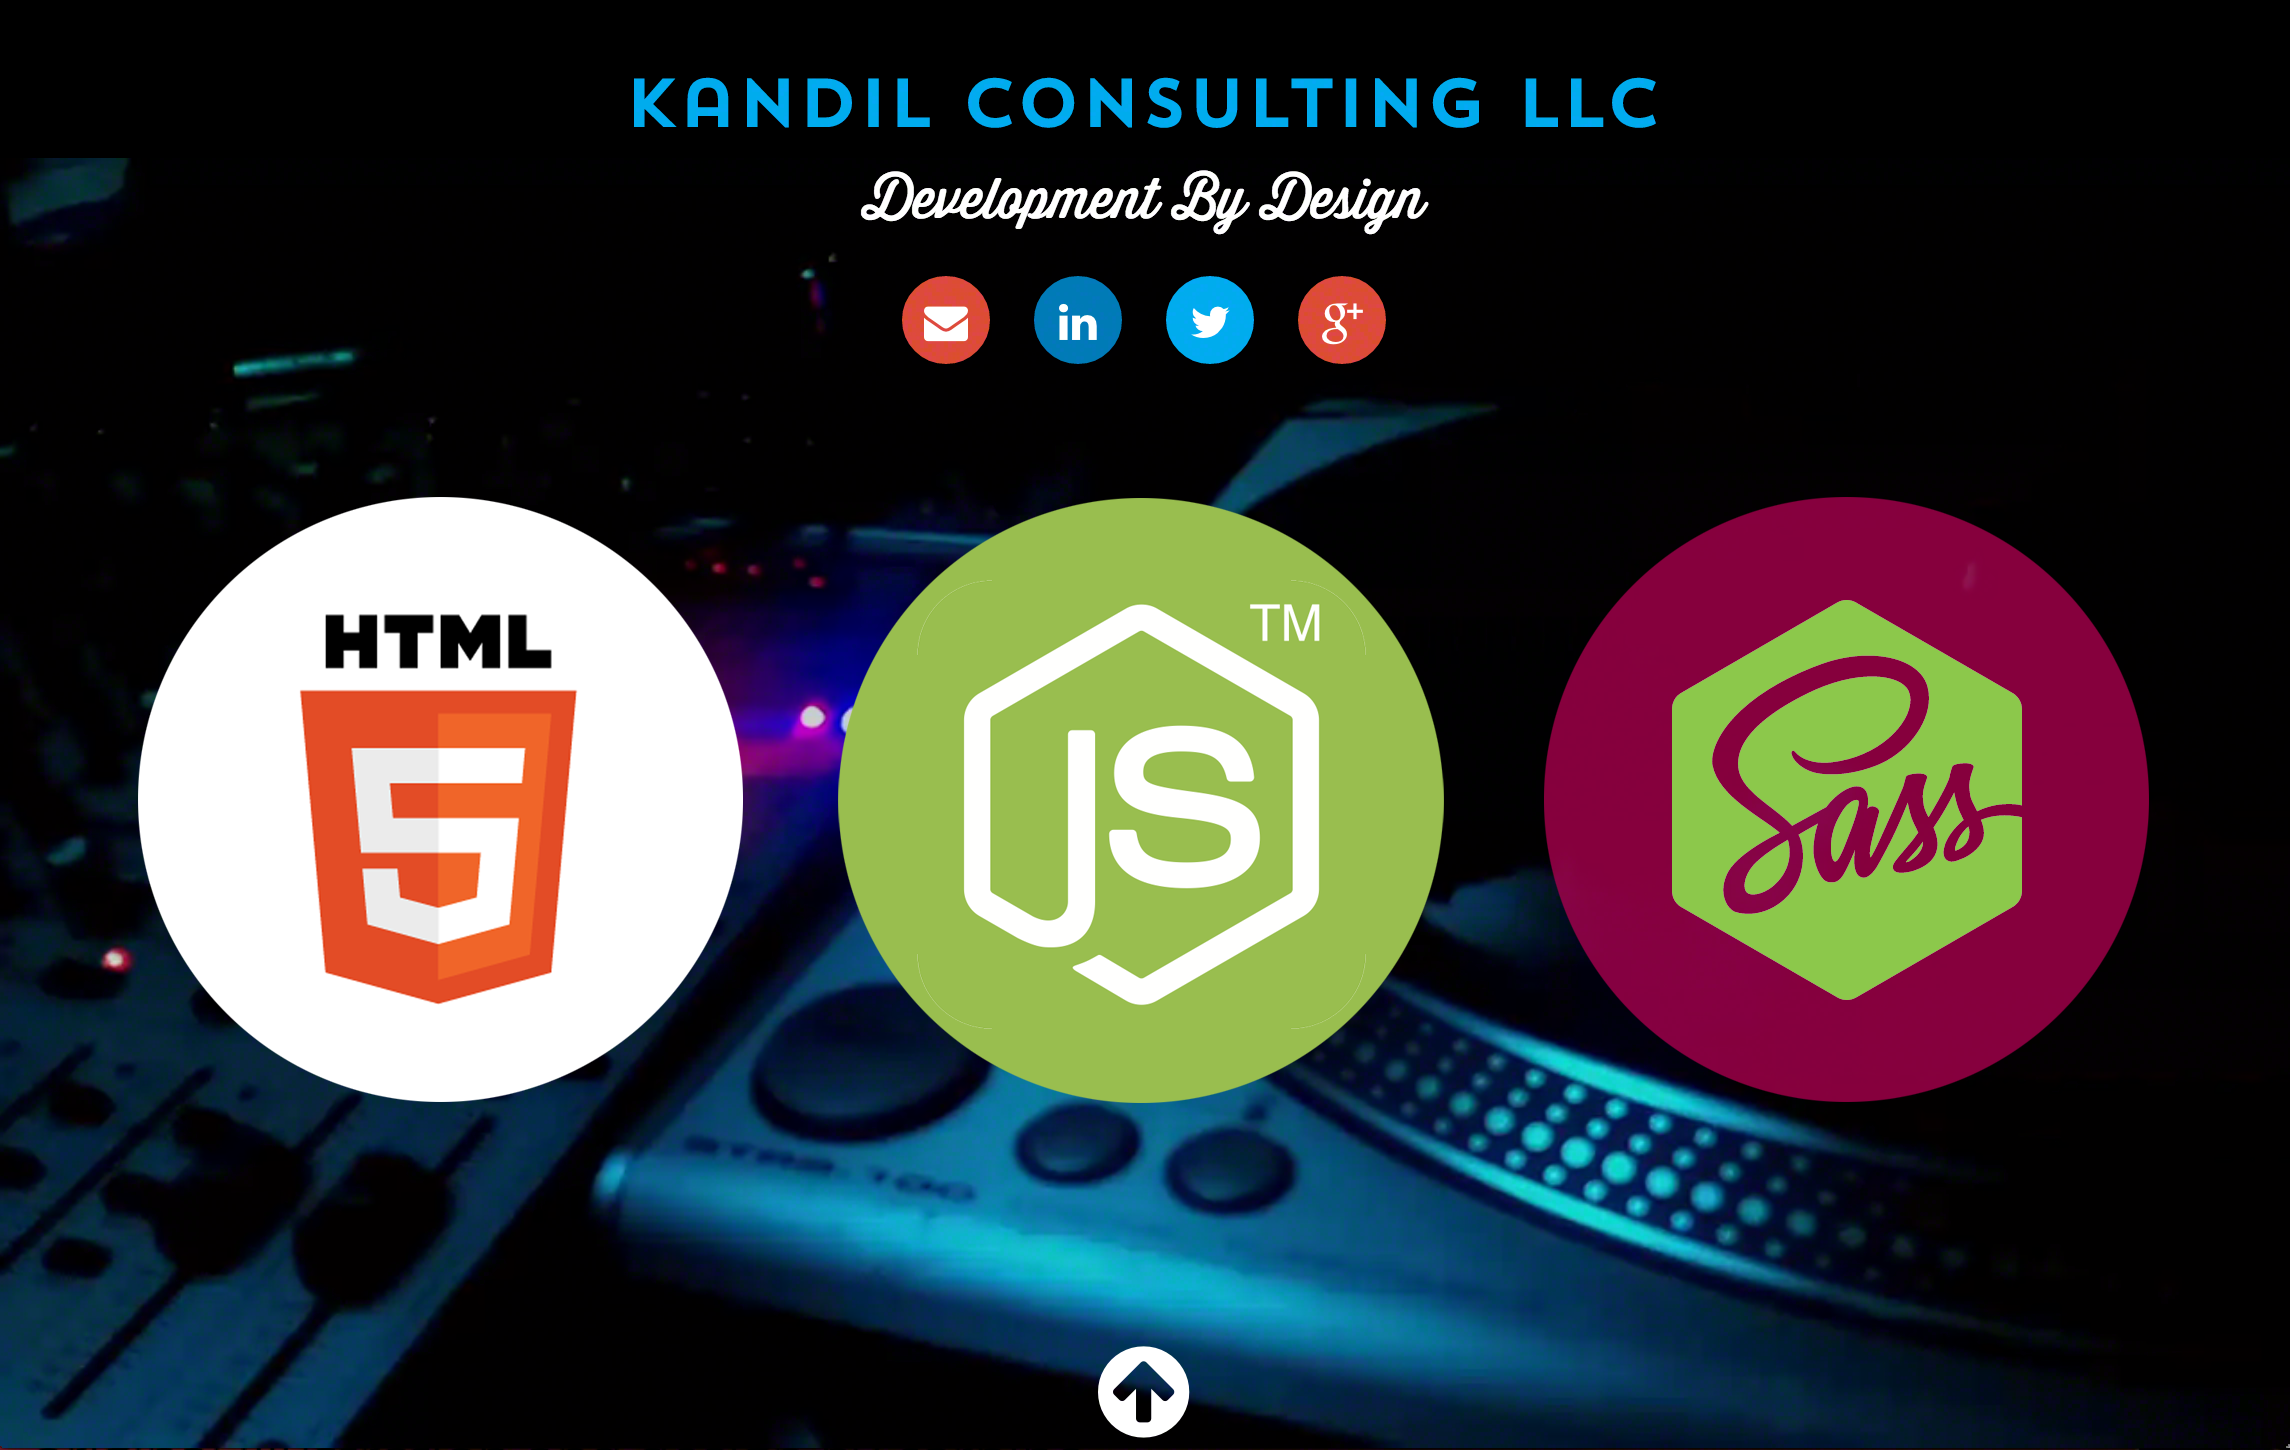 Dalya Kandil designed responsive interfaces using Bootstrap, Node JS and Web video to showcase Dalya Kandil and Kandil Consulting LLC designs